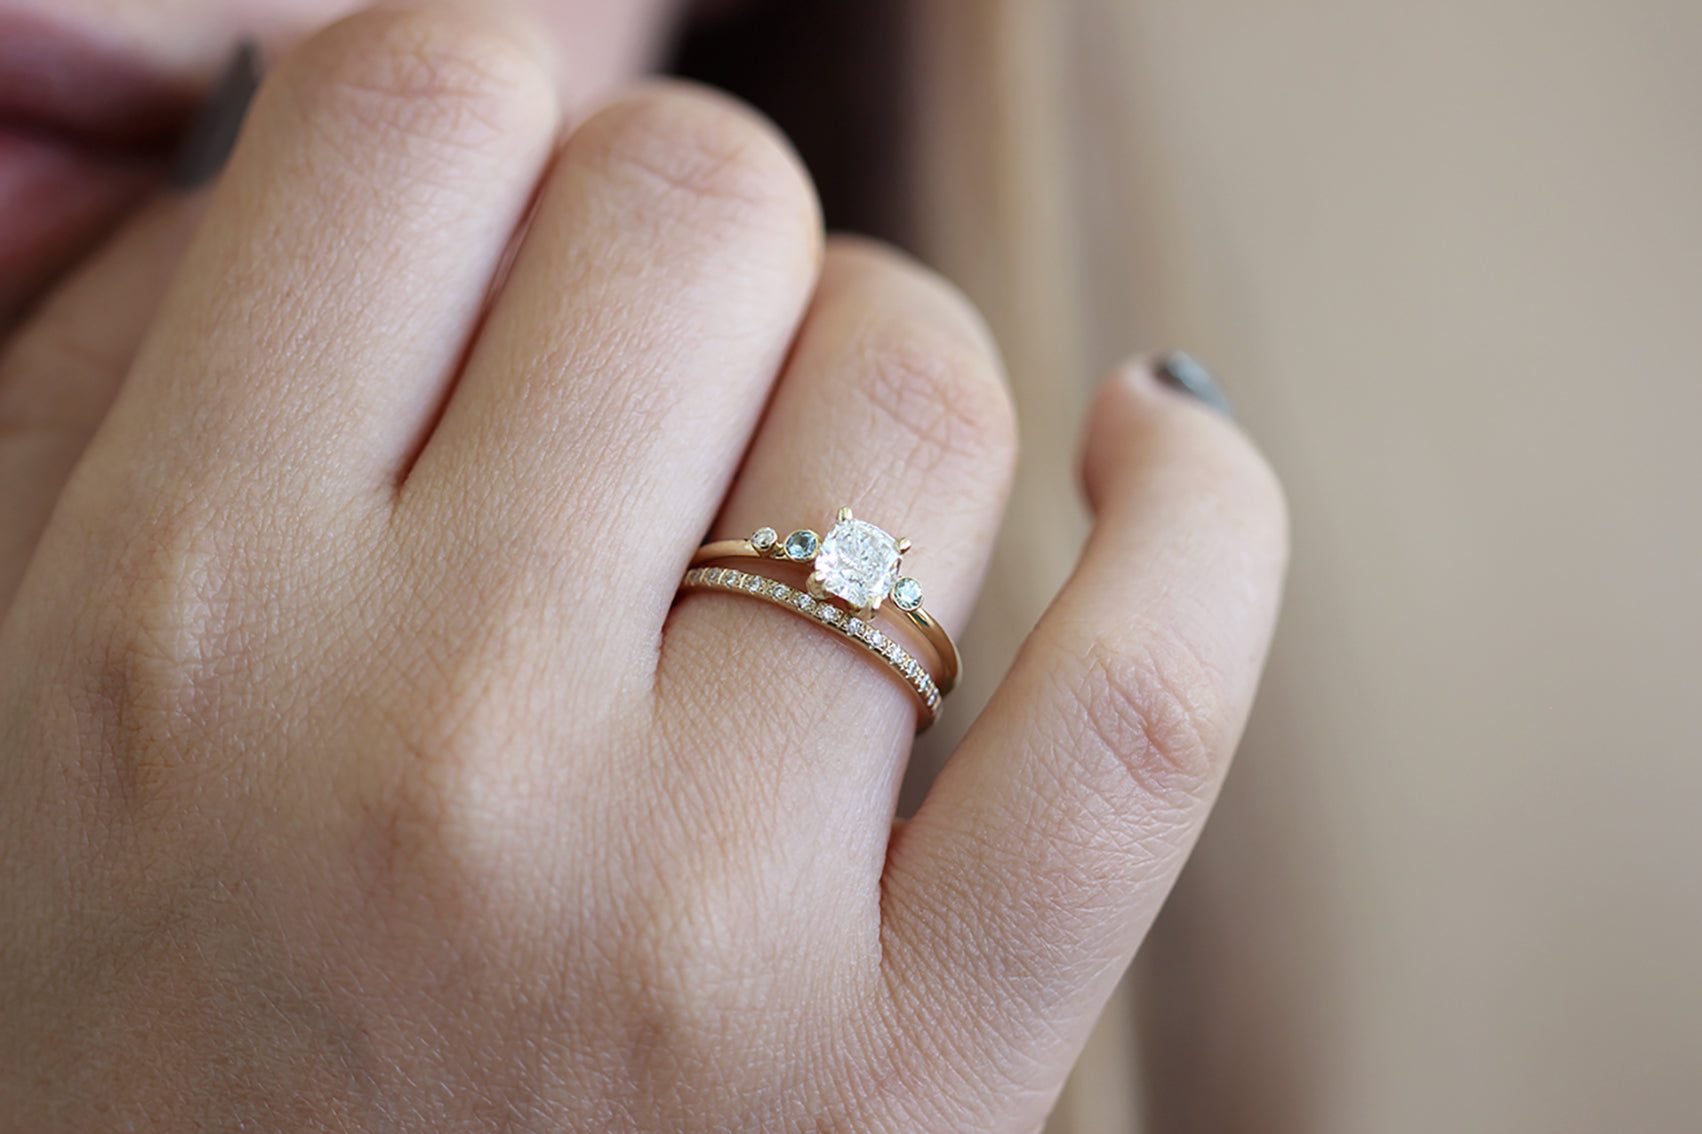 10 Things to consider when buying an engagement ring – Fenton